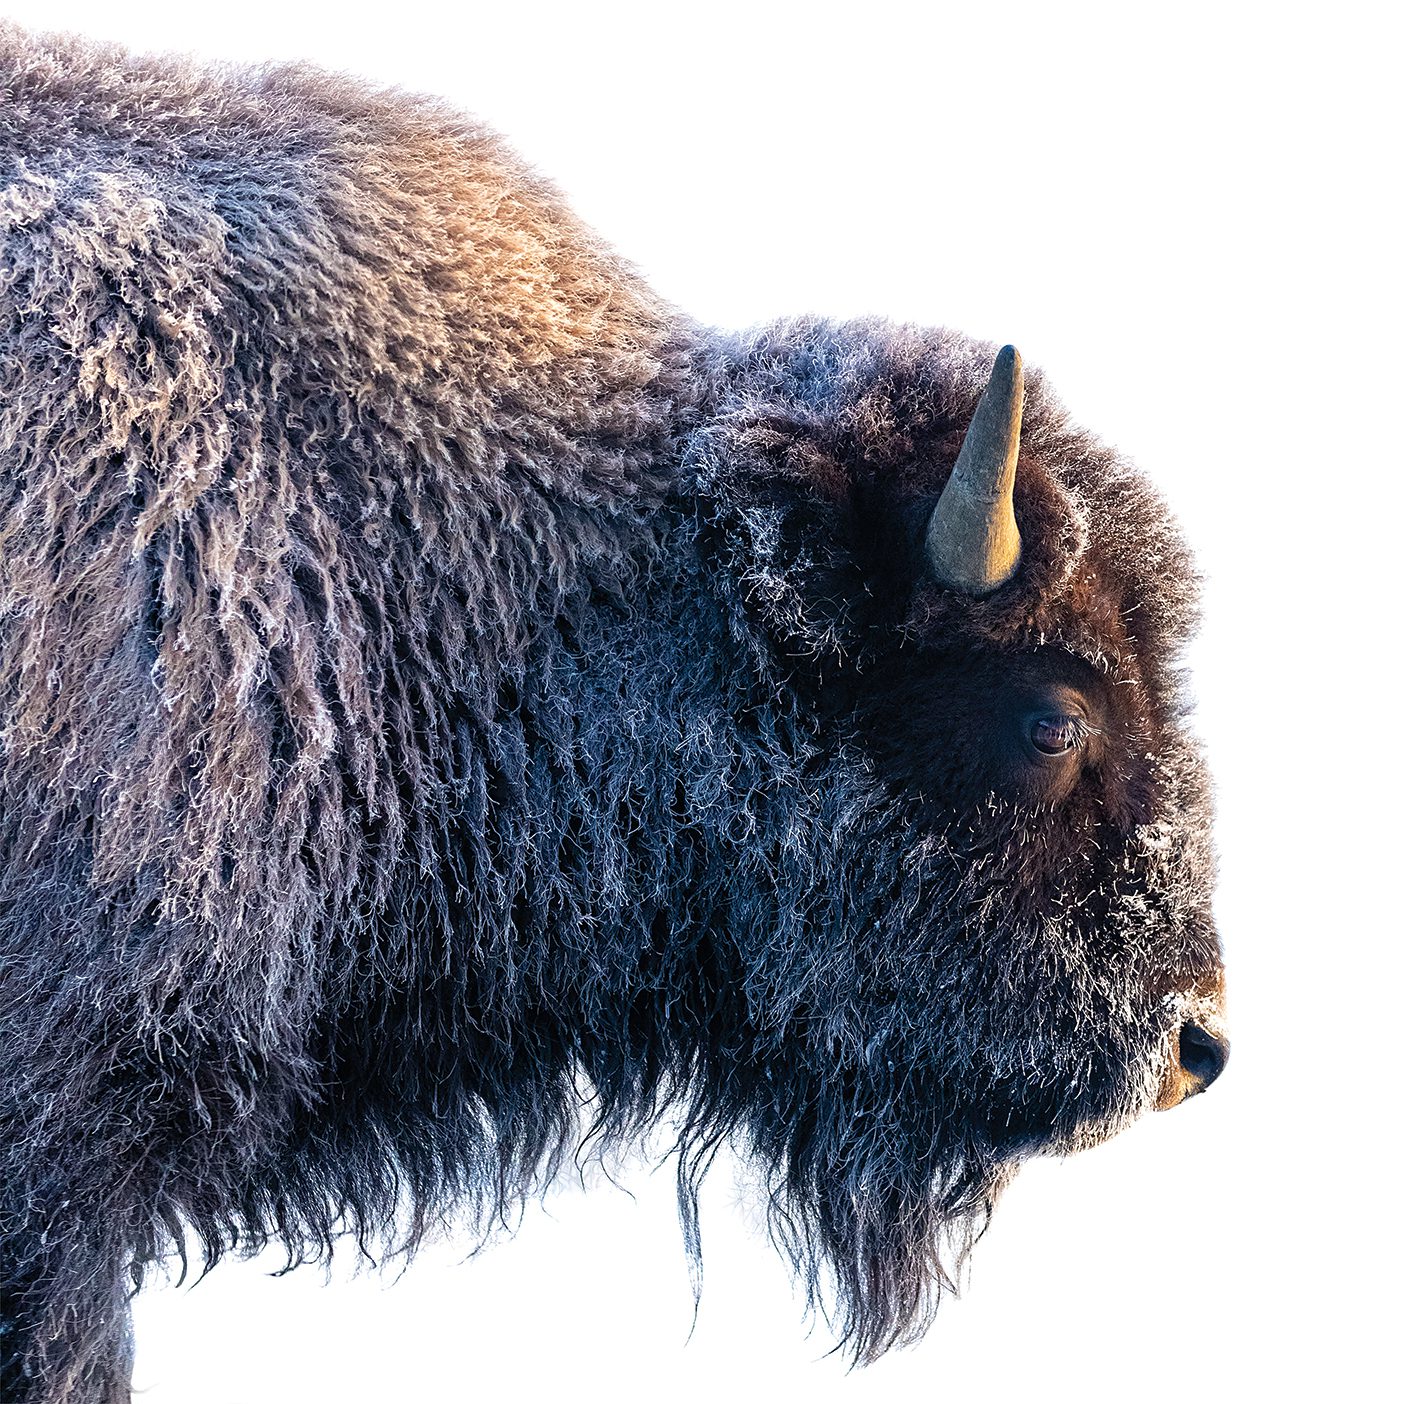 Side shot of a large bison from its neck up.